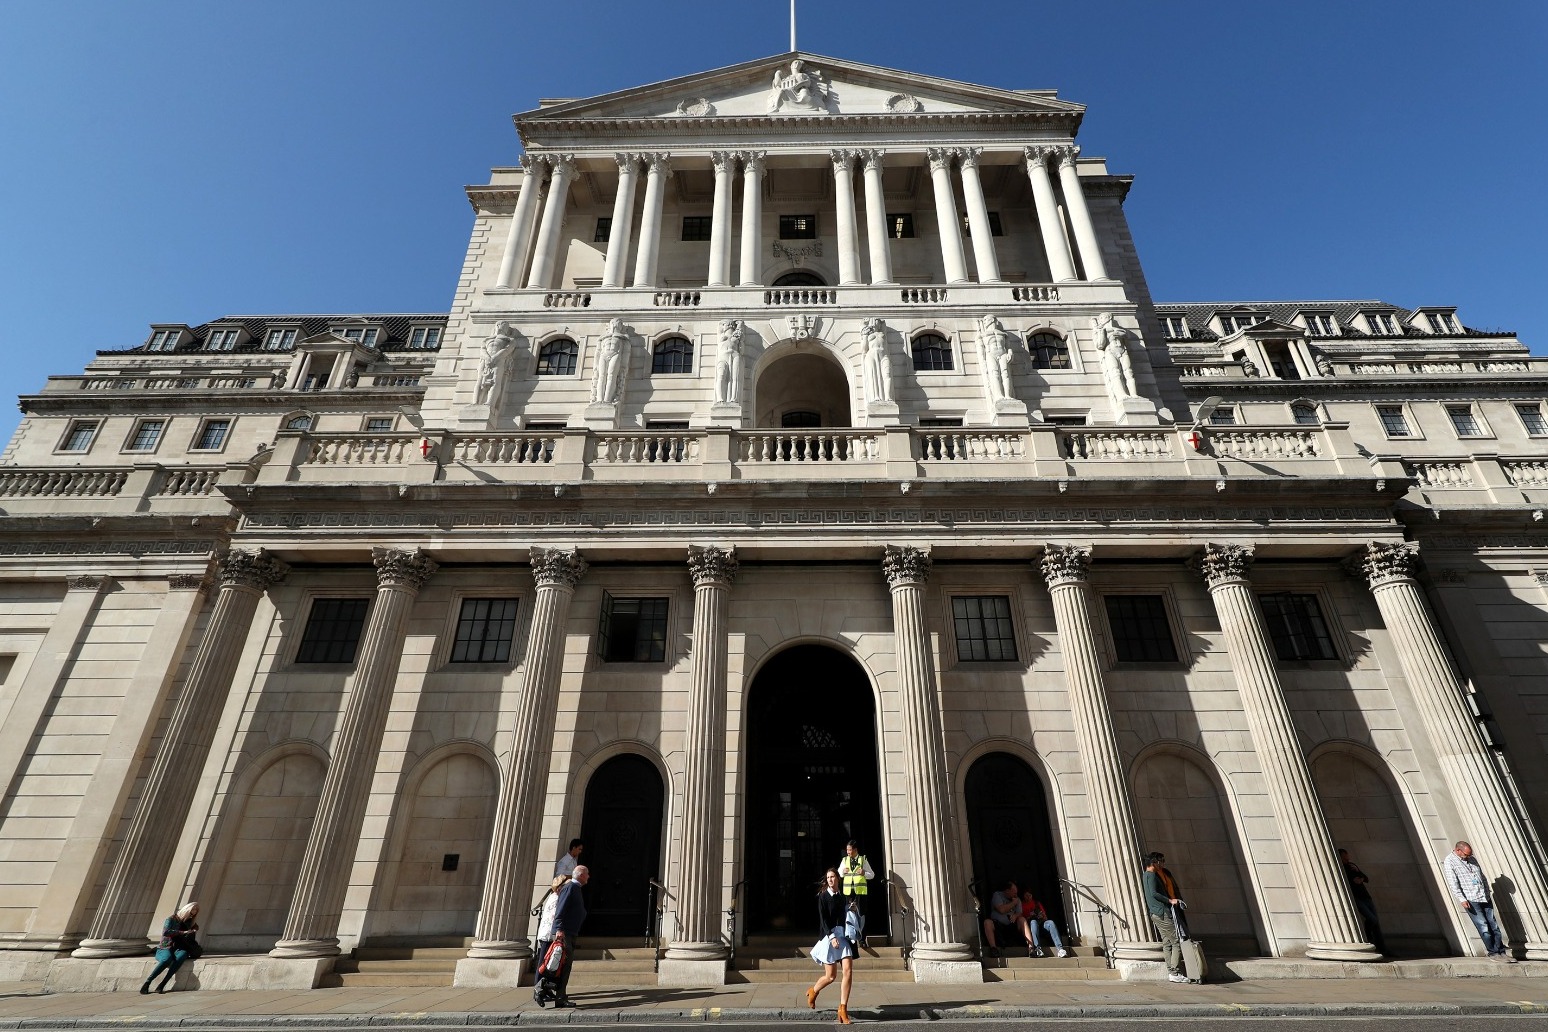 Nearly two thirds say rising interest rates worry them